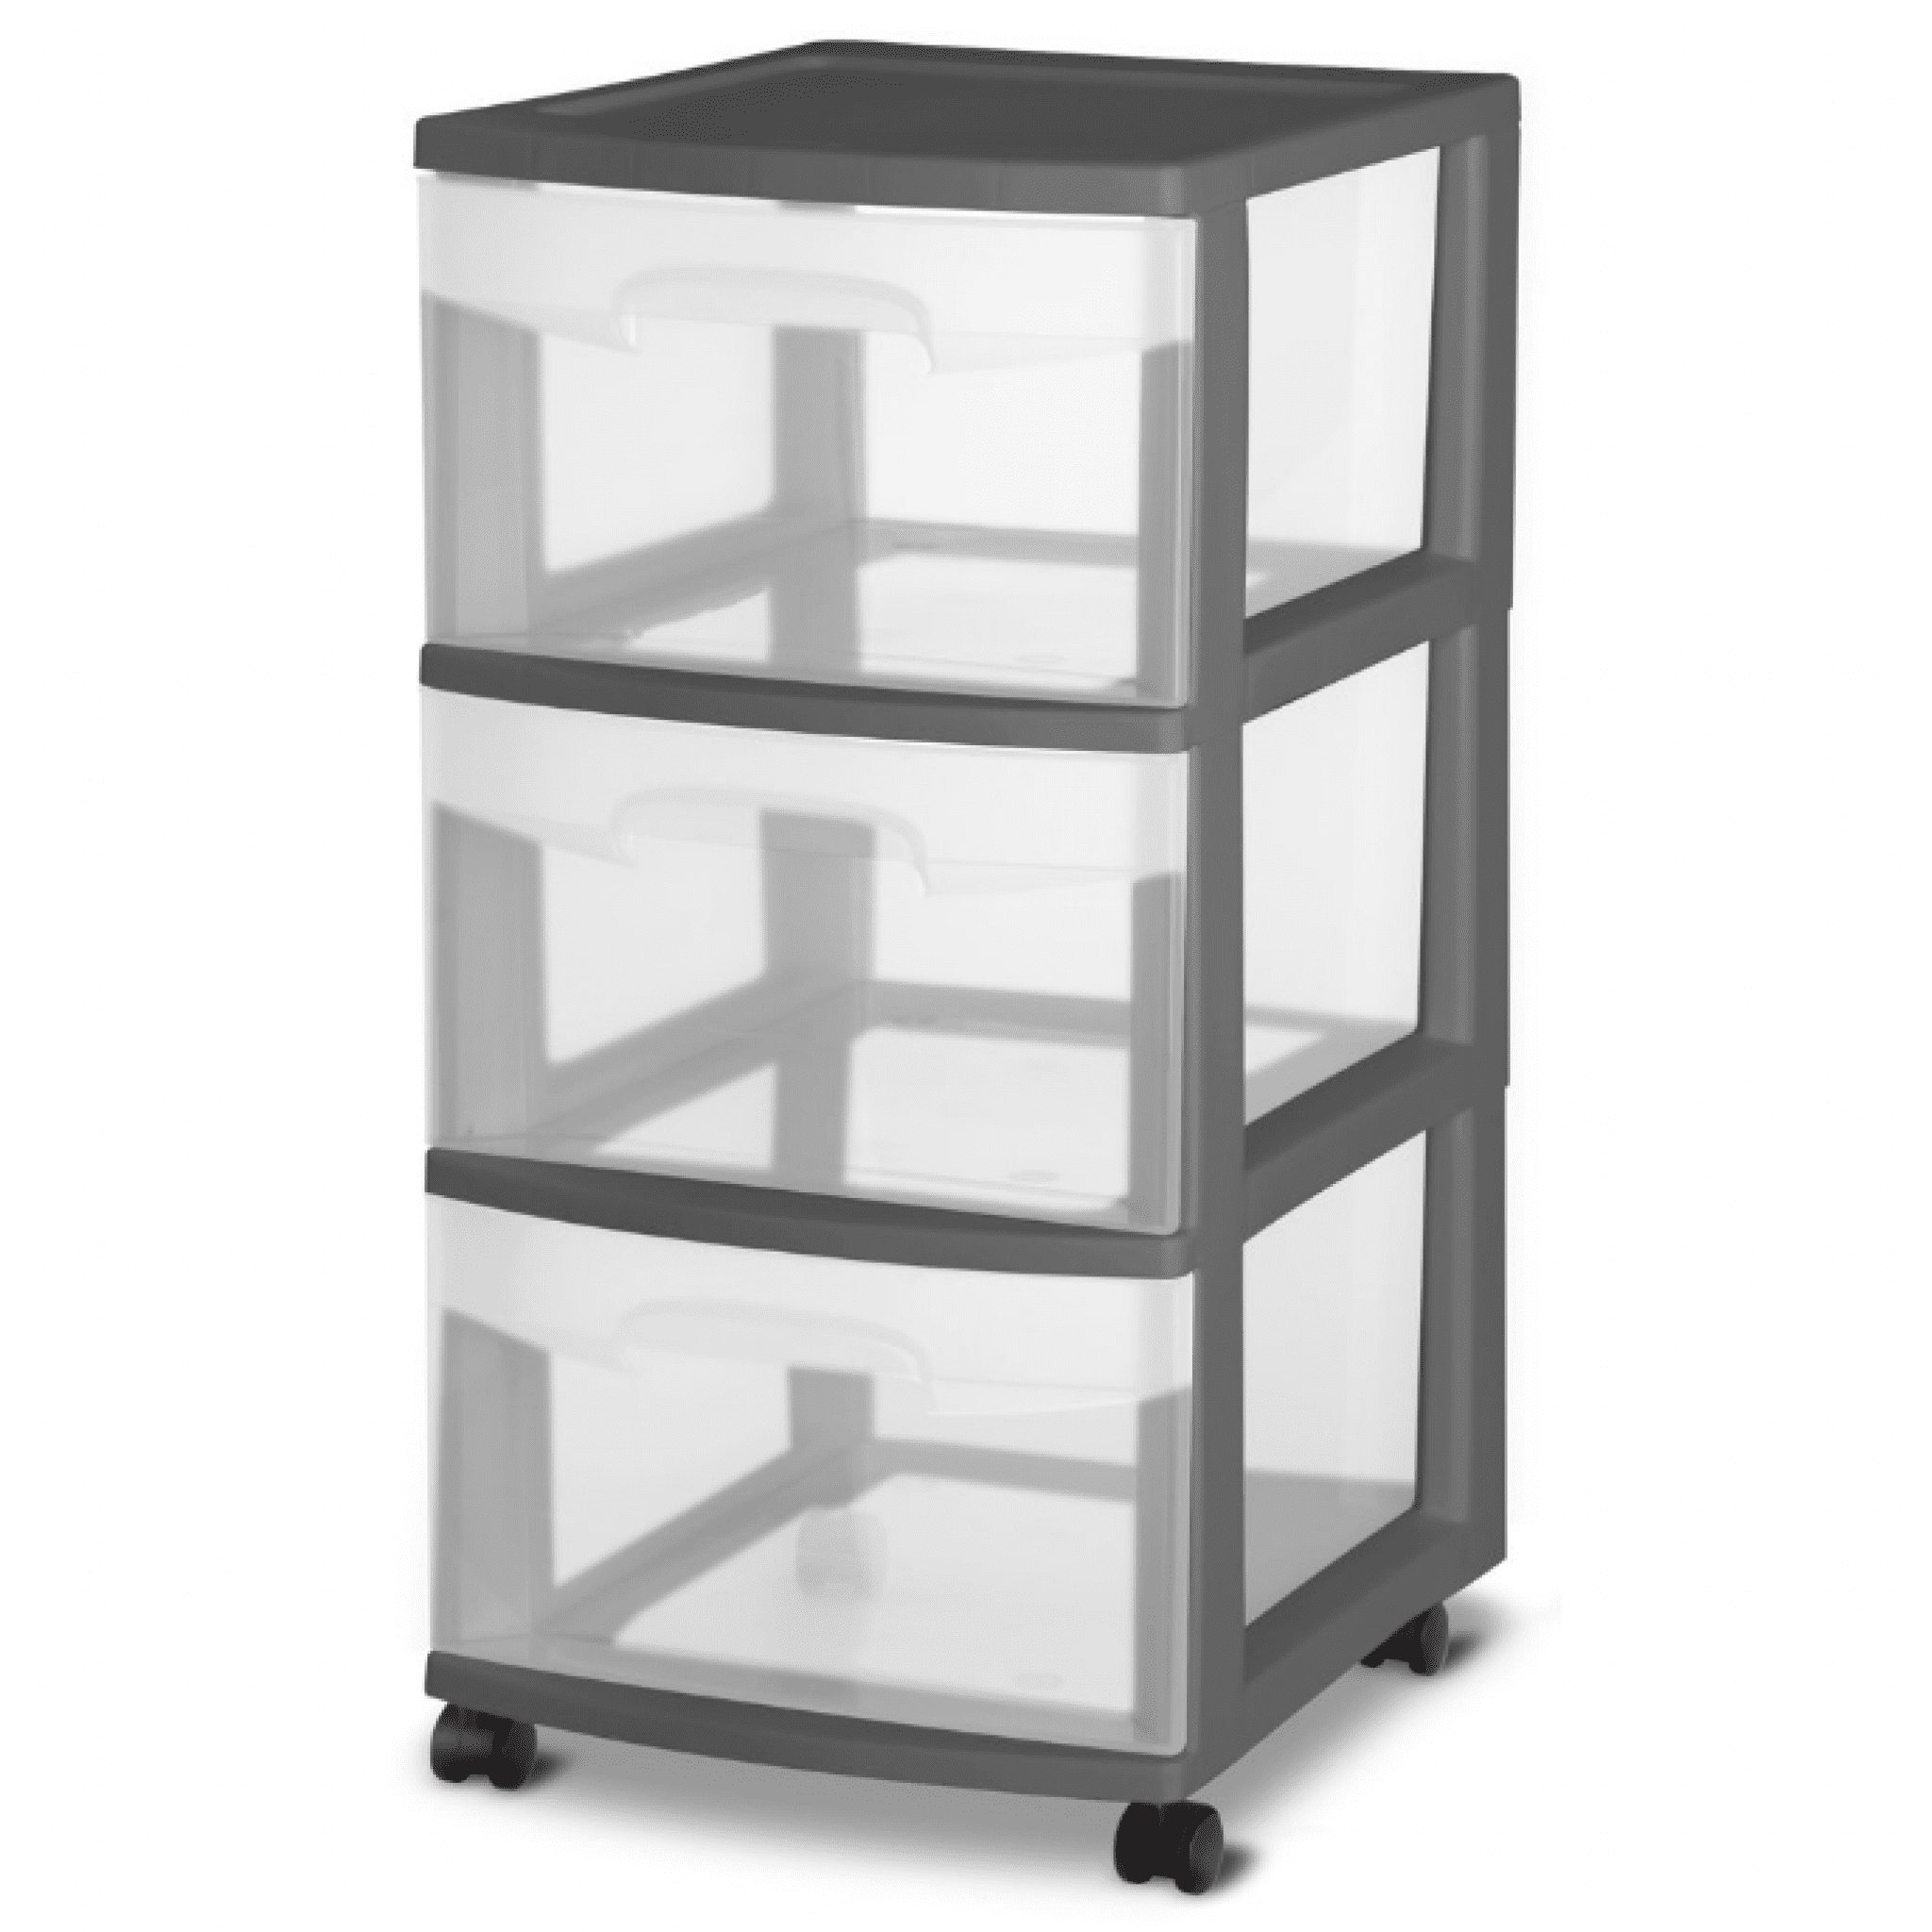 Sterilite 3 Drawer Cart in Gray Now 3 at Walmart!!!!!! Yes We Coupon